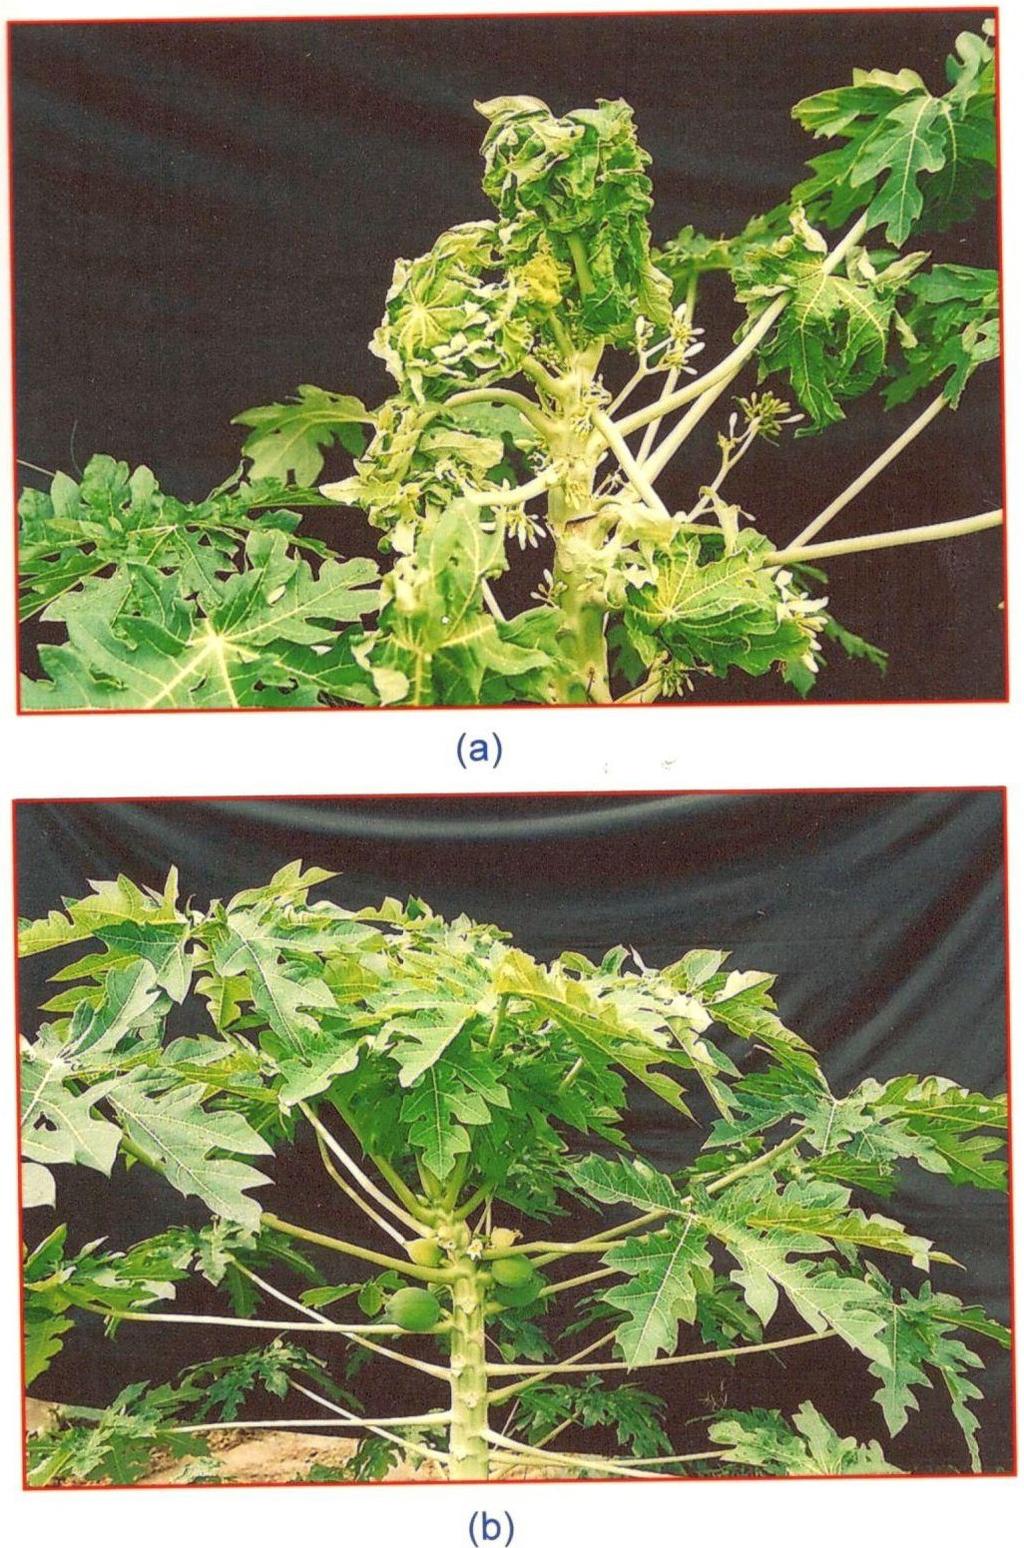 Citation: Najam A, Awasthi LP, Verma HN. Ecofriendly management of natural infection of viruses in papaya (Carica papaya L.) by phytoproteins, isolated from B. diffusa and C.